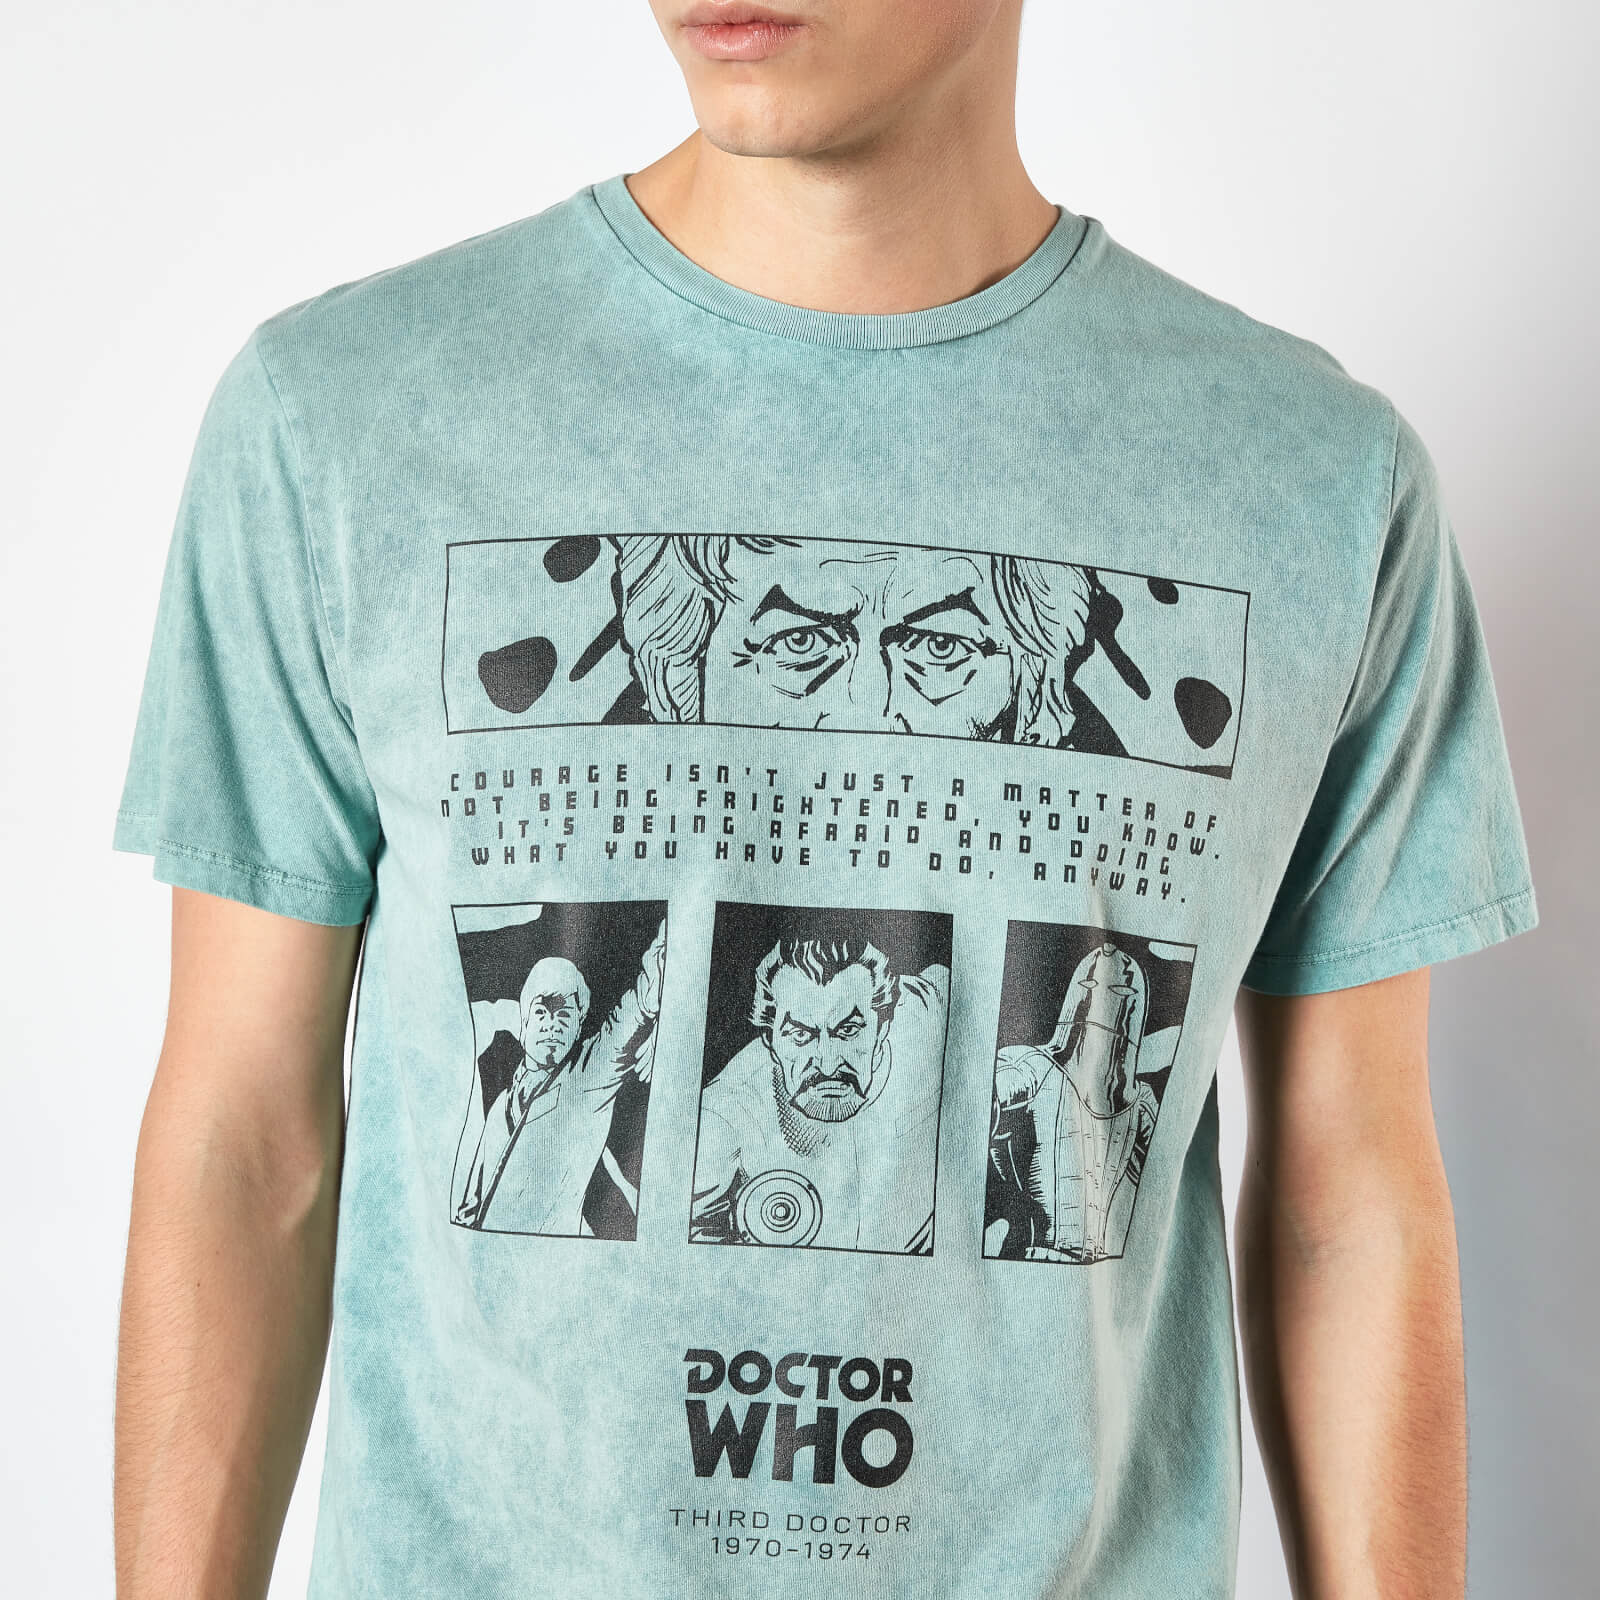 Doctor Who 3rd Doctor Unisex T-Shirt - Mint Acid Wash - XS